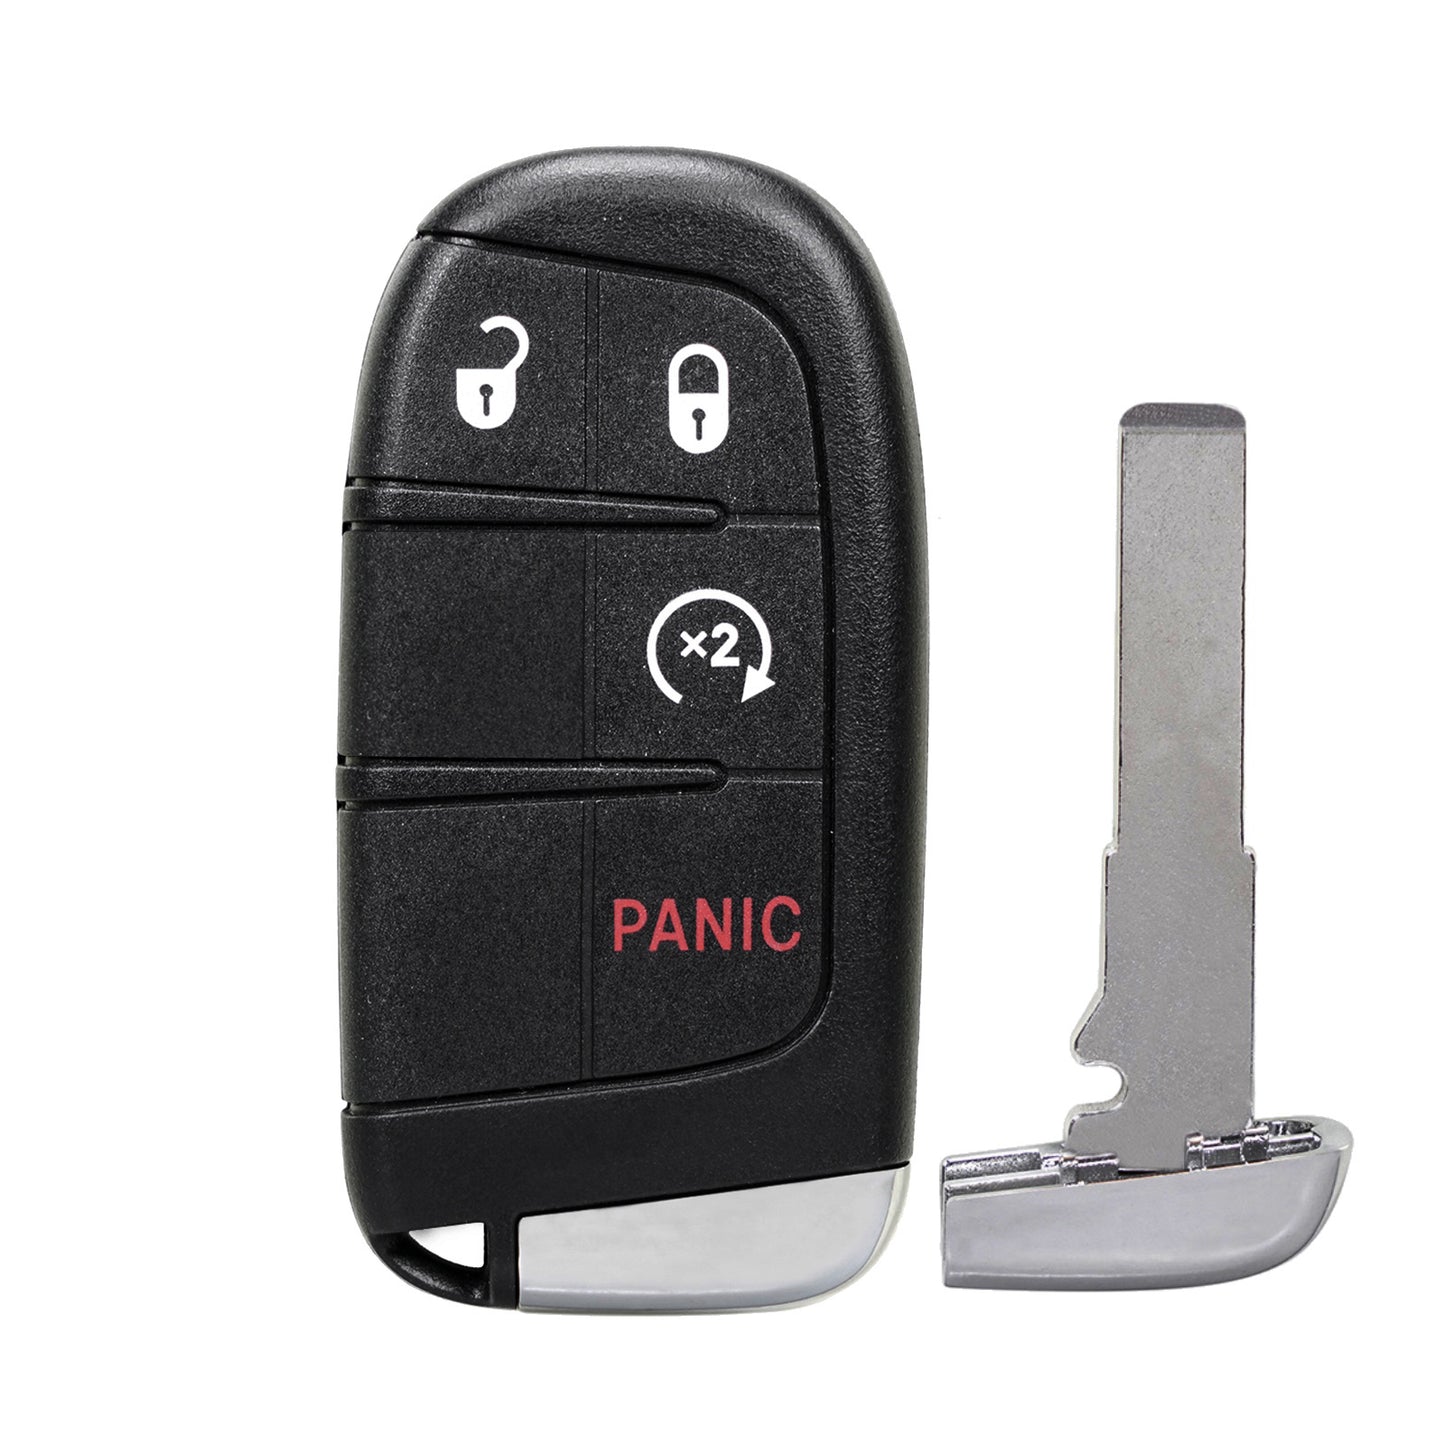 4 Buttons 433MHz Keyless Entry Fob Remote Car Key For 2015-2021 Jeep Renegade Compass (New Body Style) FCC ID: M3N-40821302 SKU : J721